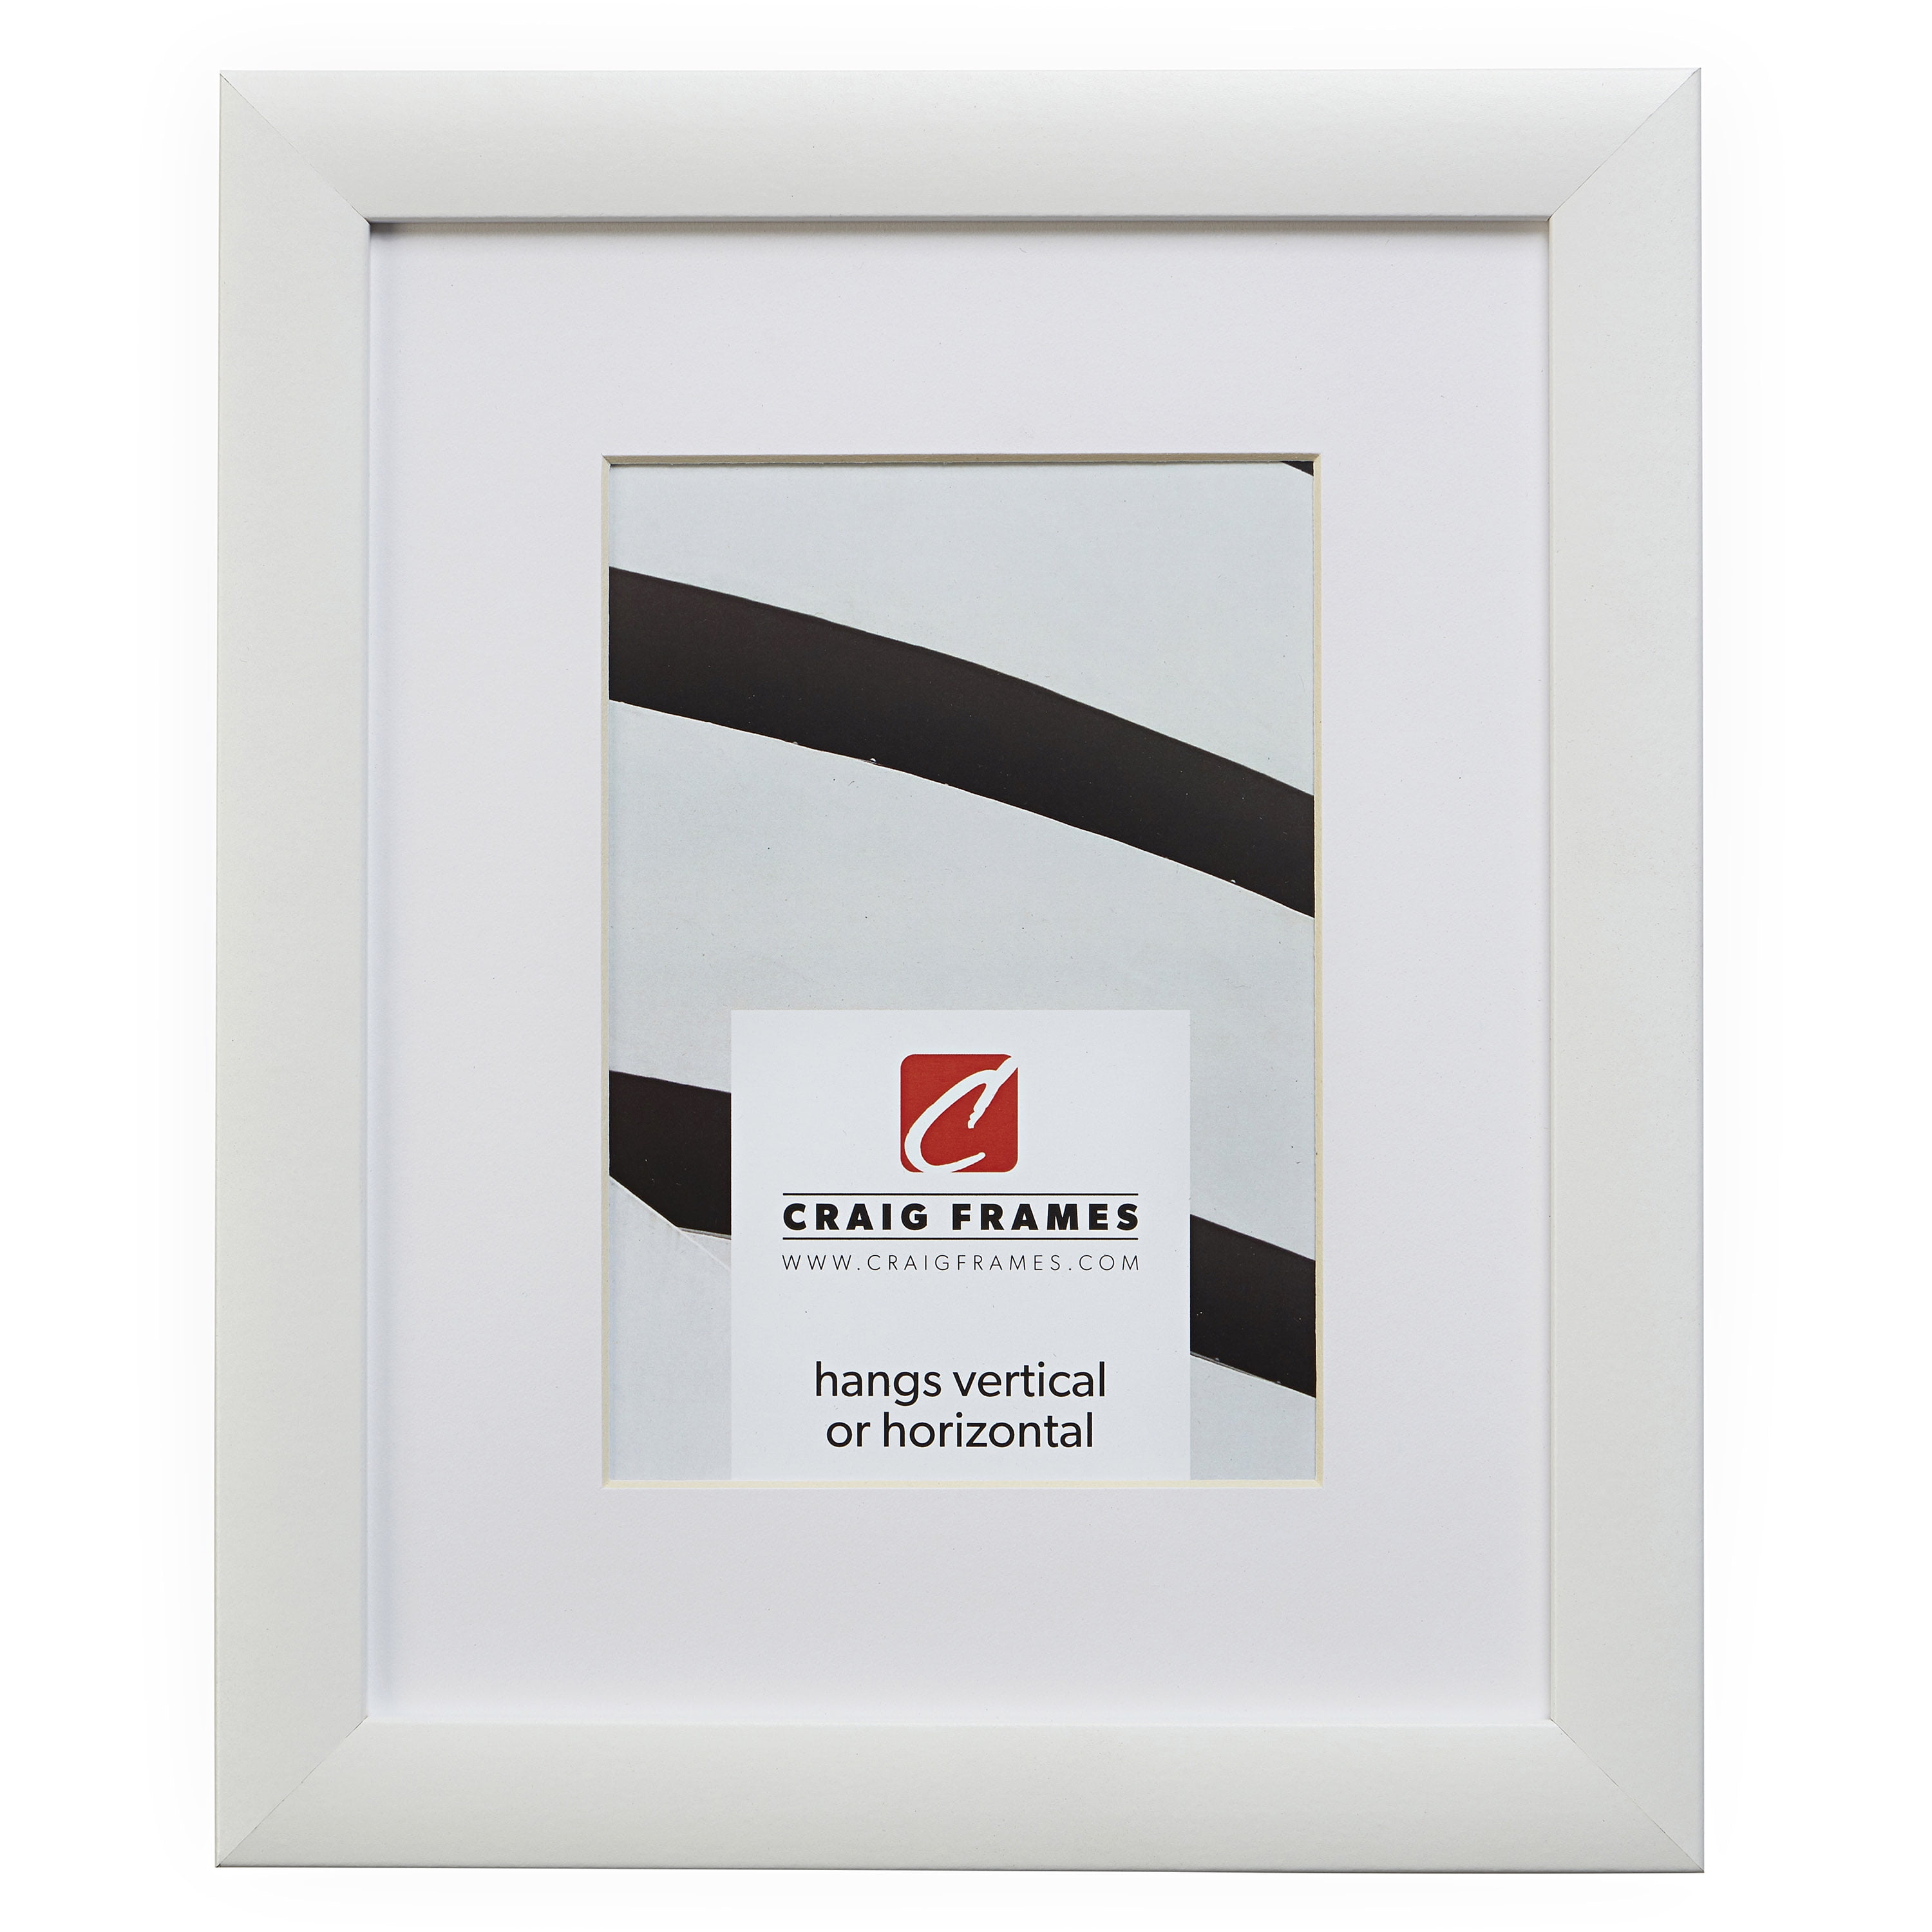 Details about   Creative Picture Frames 11x14-inch Mahogany Diploma Frame with Black Mat to Hold 